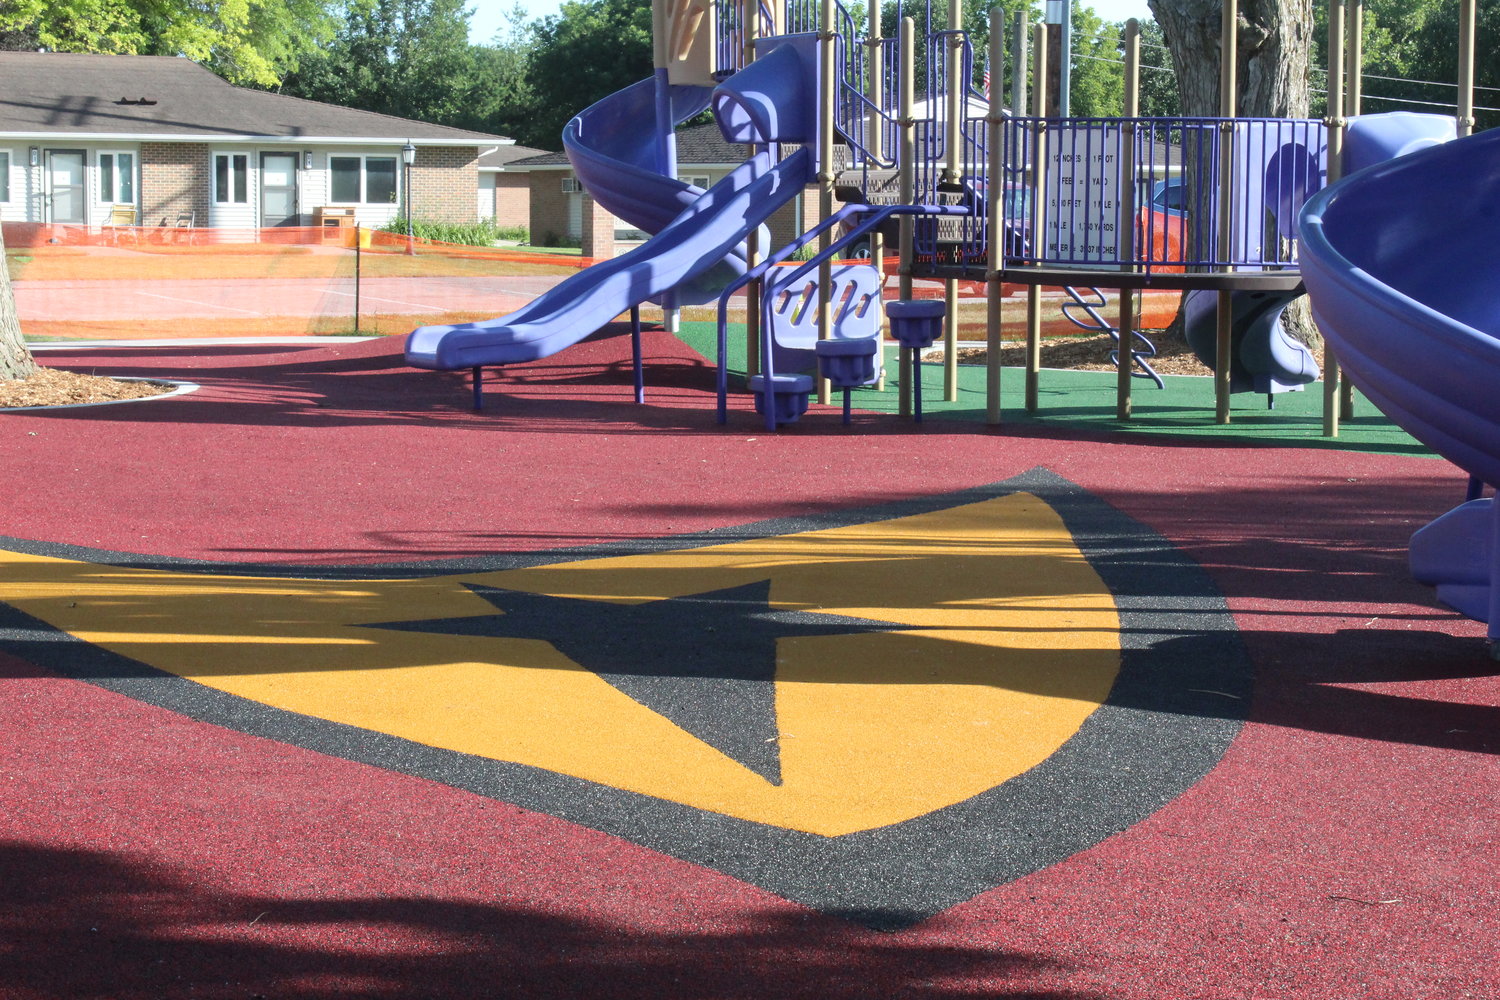 The new playground surface is in at Railroad Park in Riverside, and it comes with a colorful Star Trek logo. The grand re-opening of the renovated park will take place at 5 p.m. Friday June 24, the first day of Trek Fest.